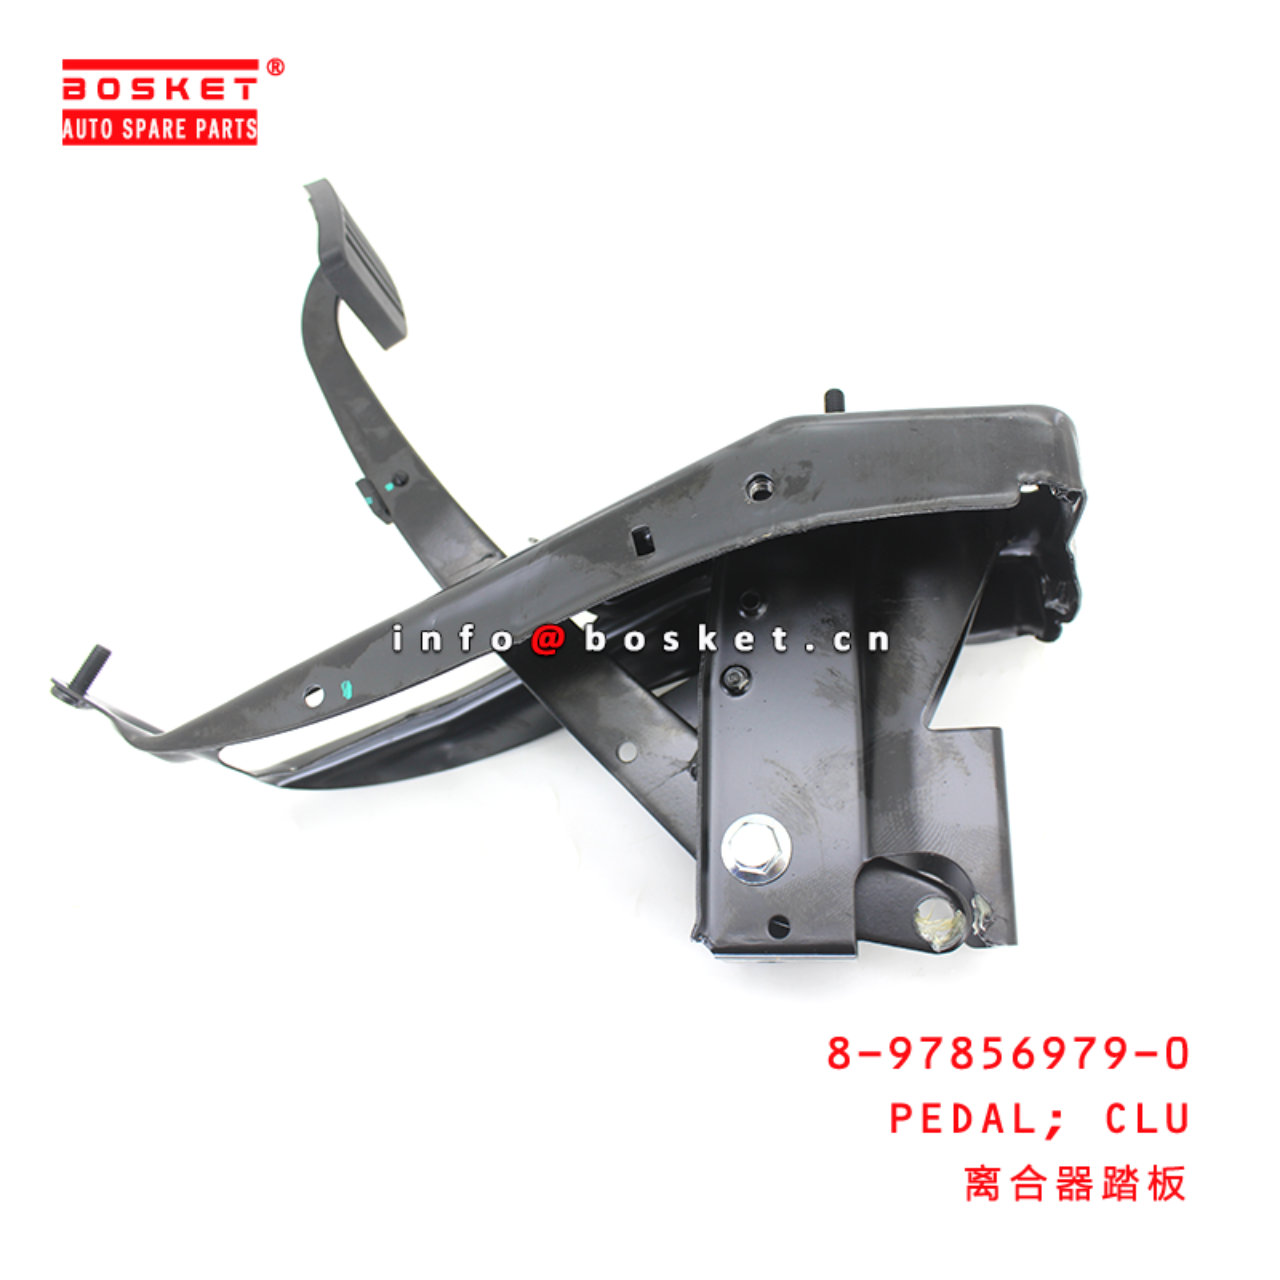 8-97856979-0 Clutch Pedal suitable for ISUZU NKR94 8978569790